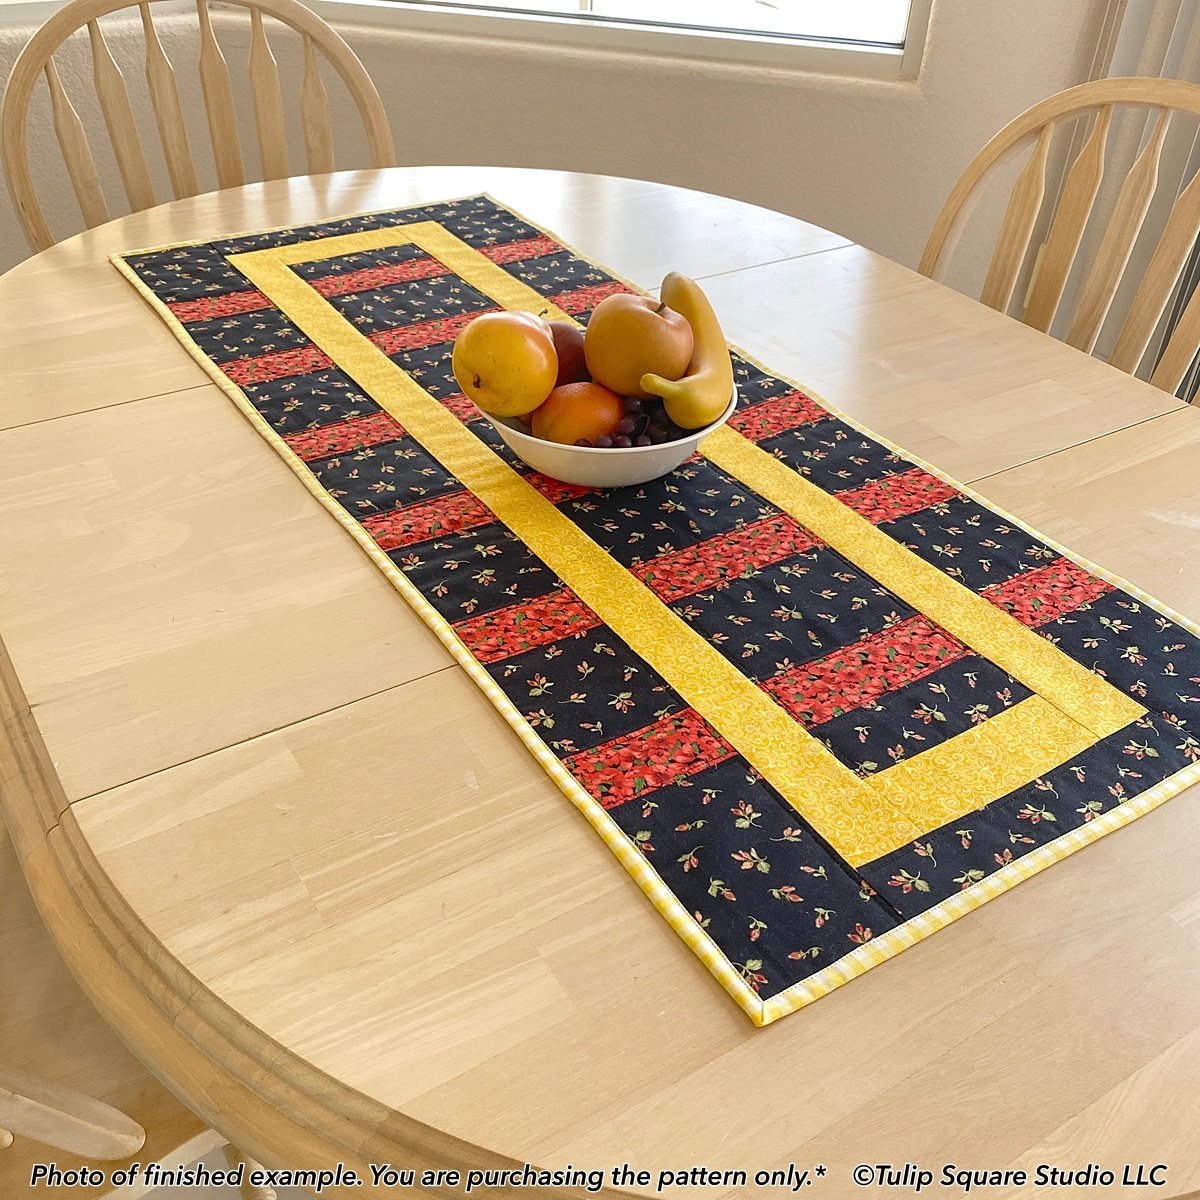 quilted table mats